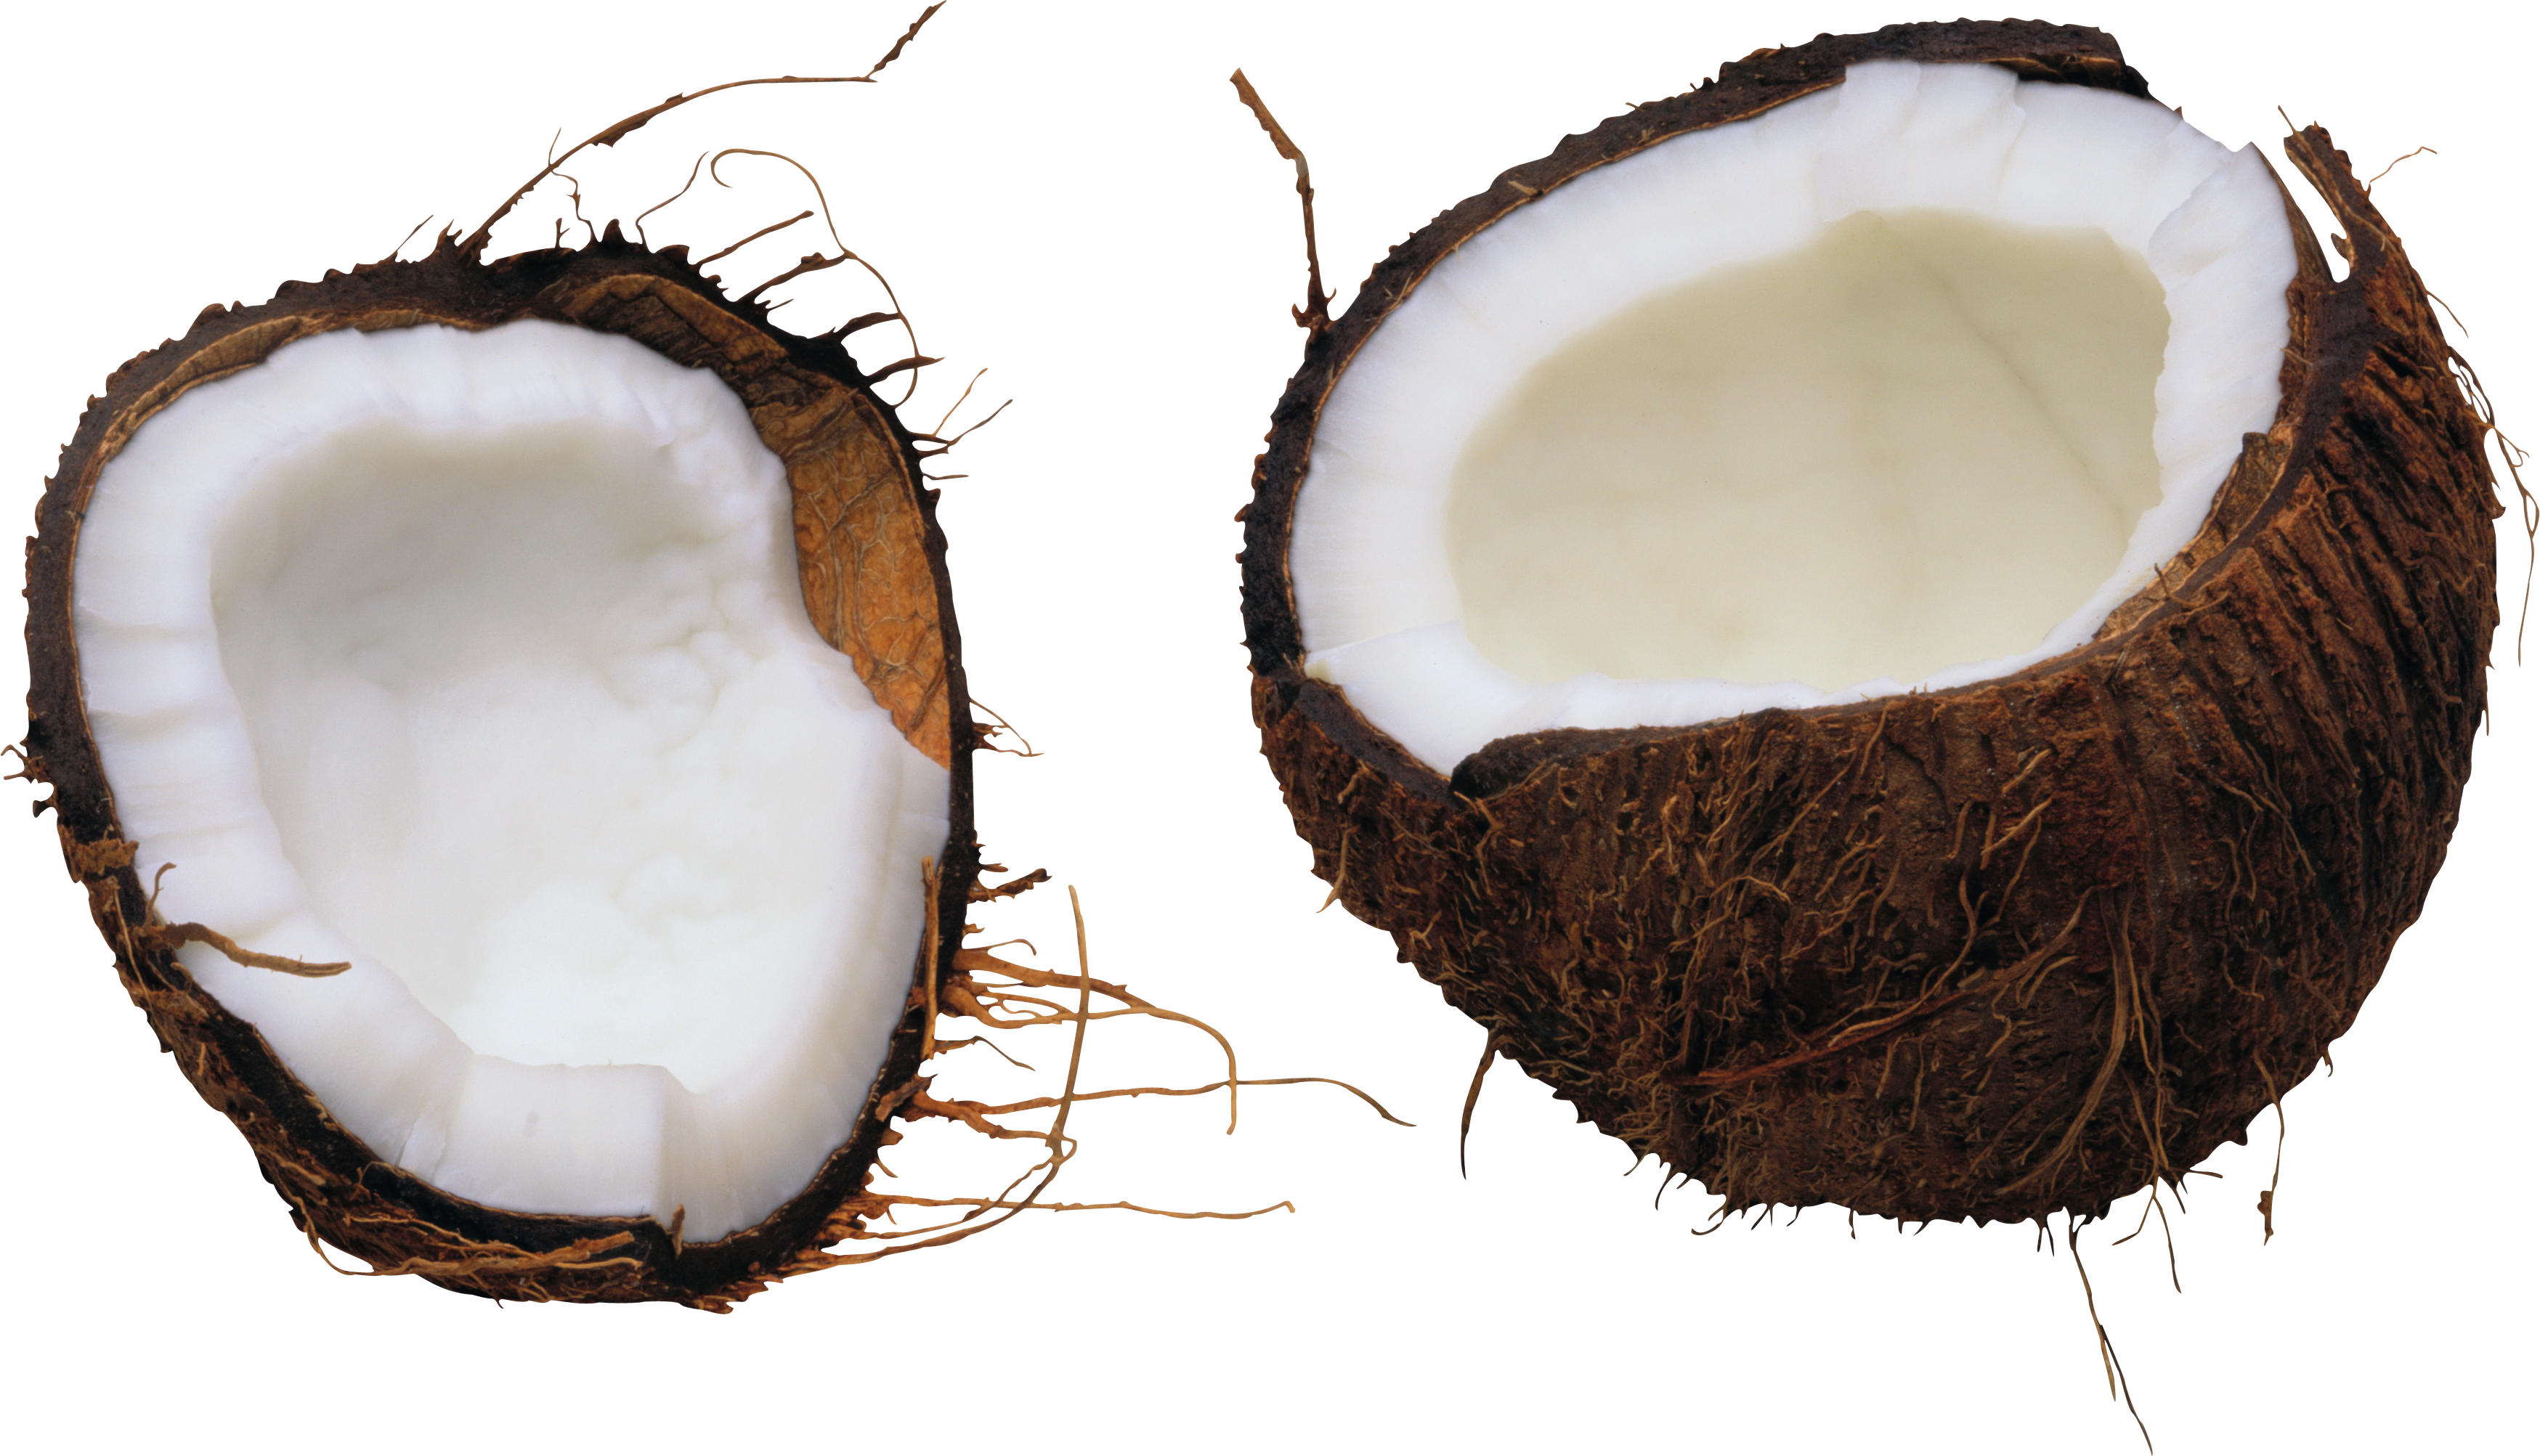 Png image . Coconut clipart copra